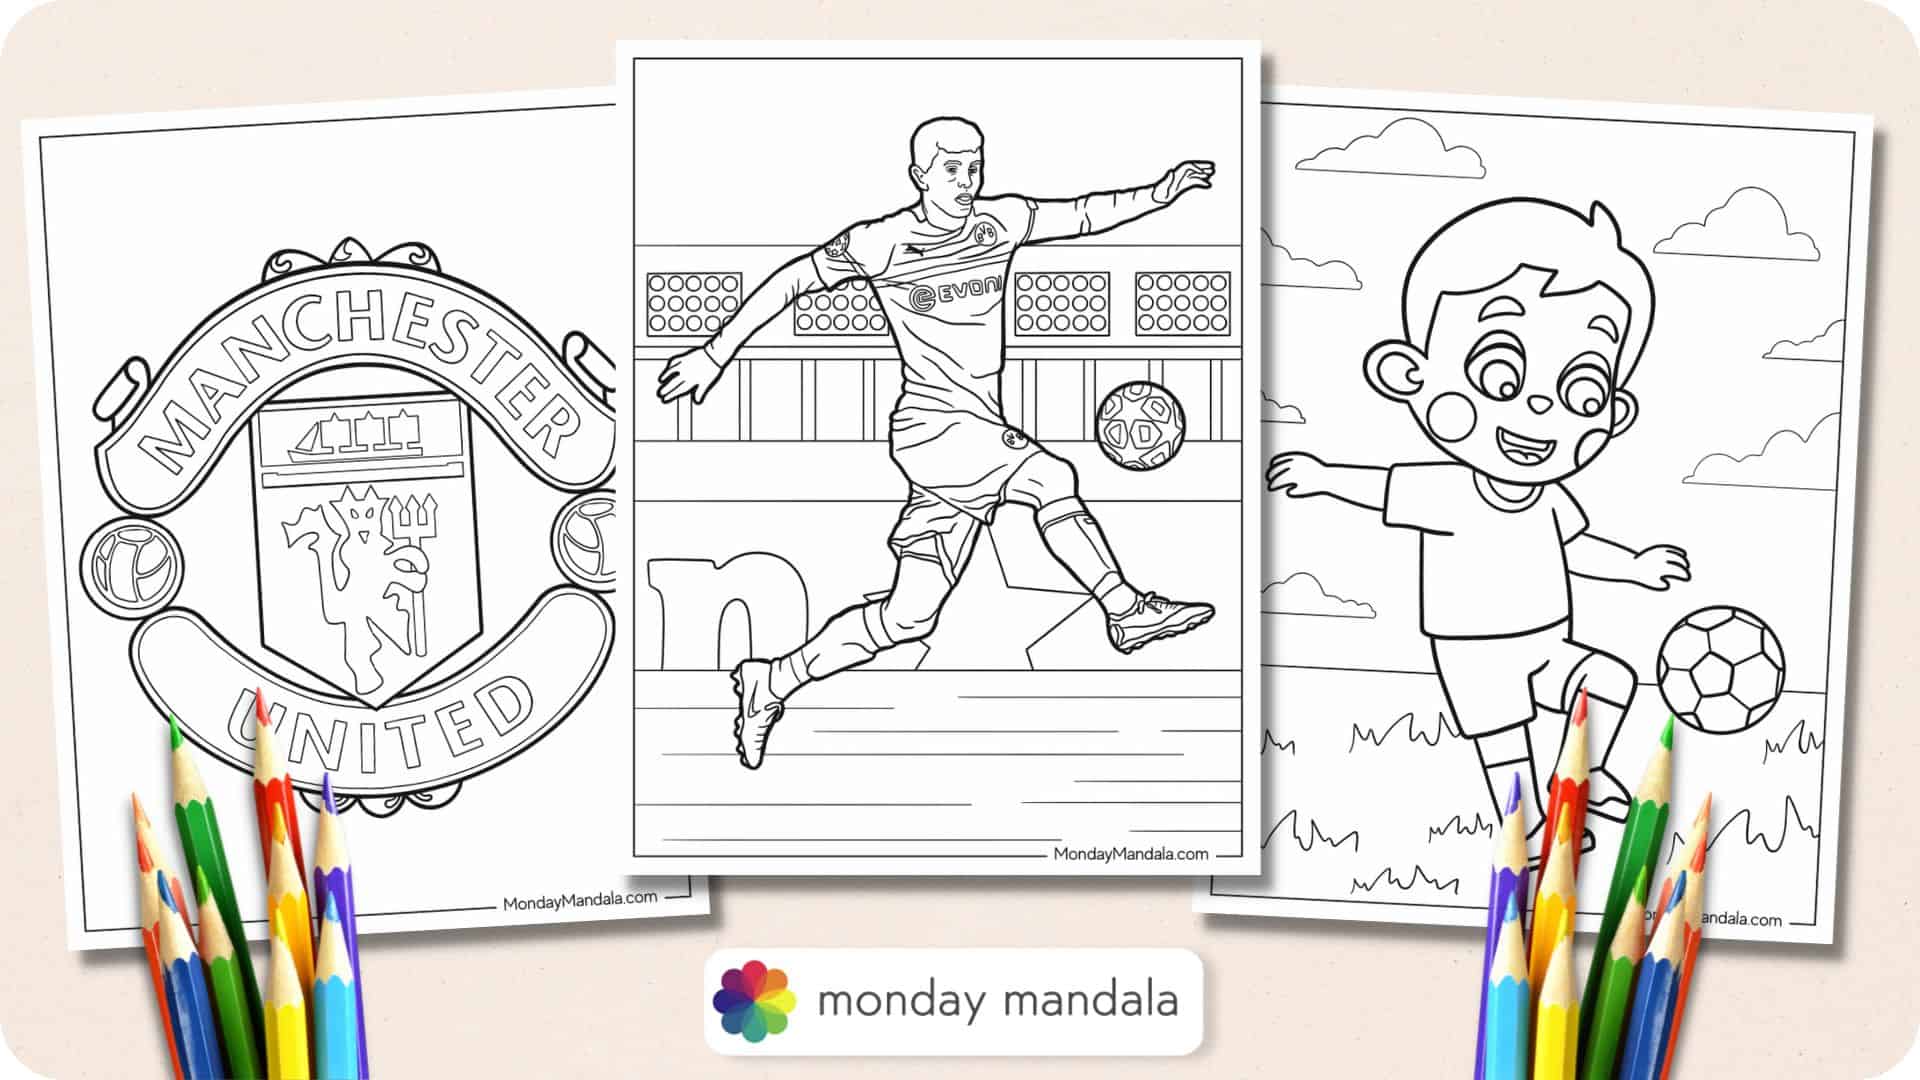 Soccer coloring pages free pdf printables